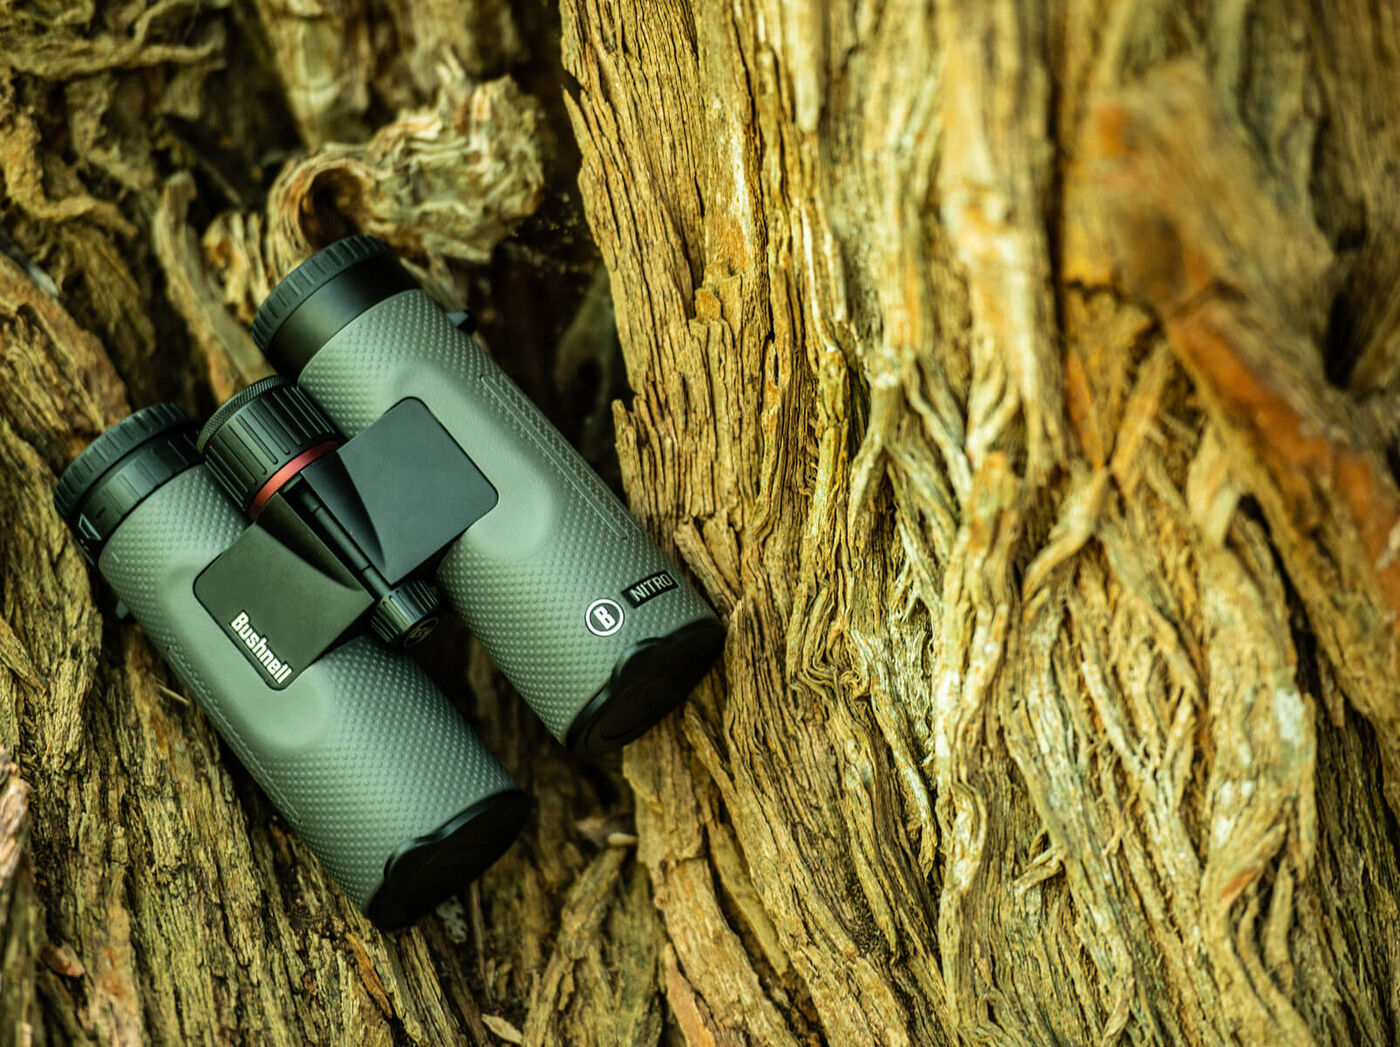 The New Vault Binocular Harness System from Bushnell